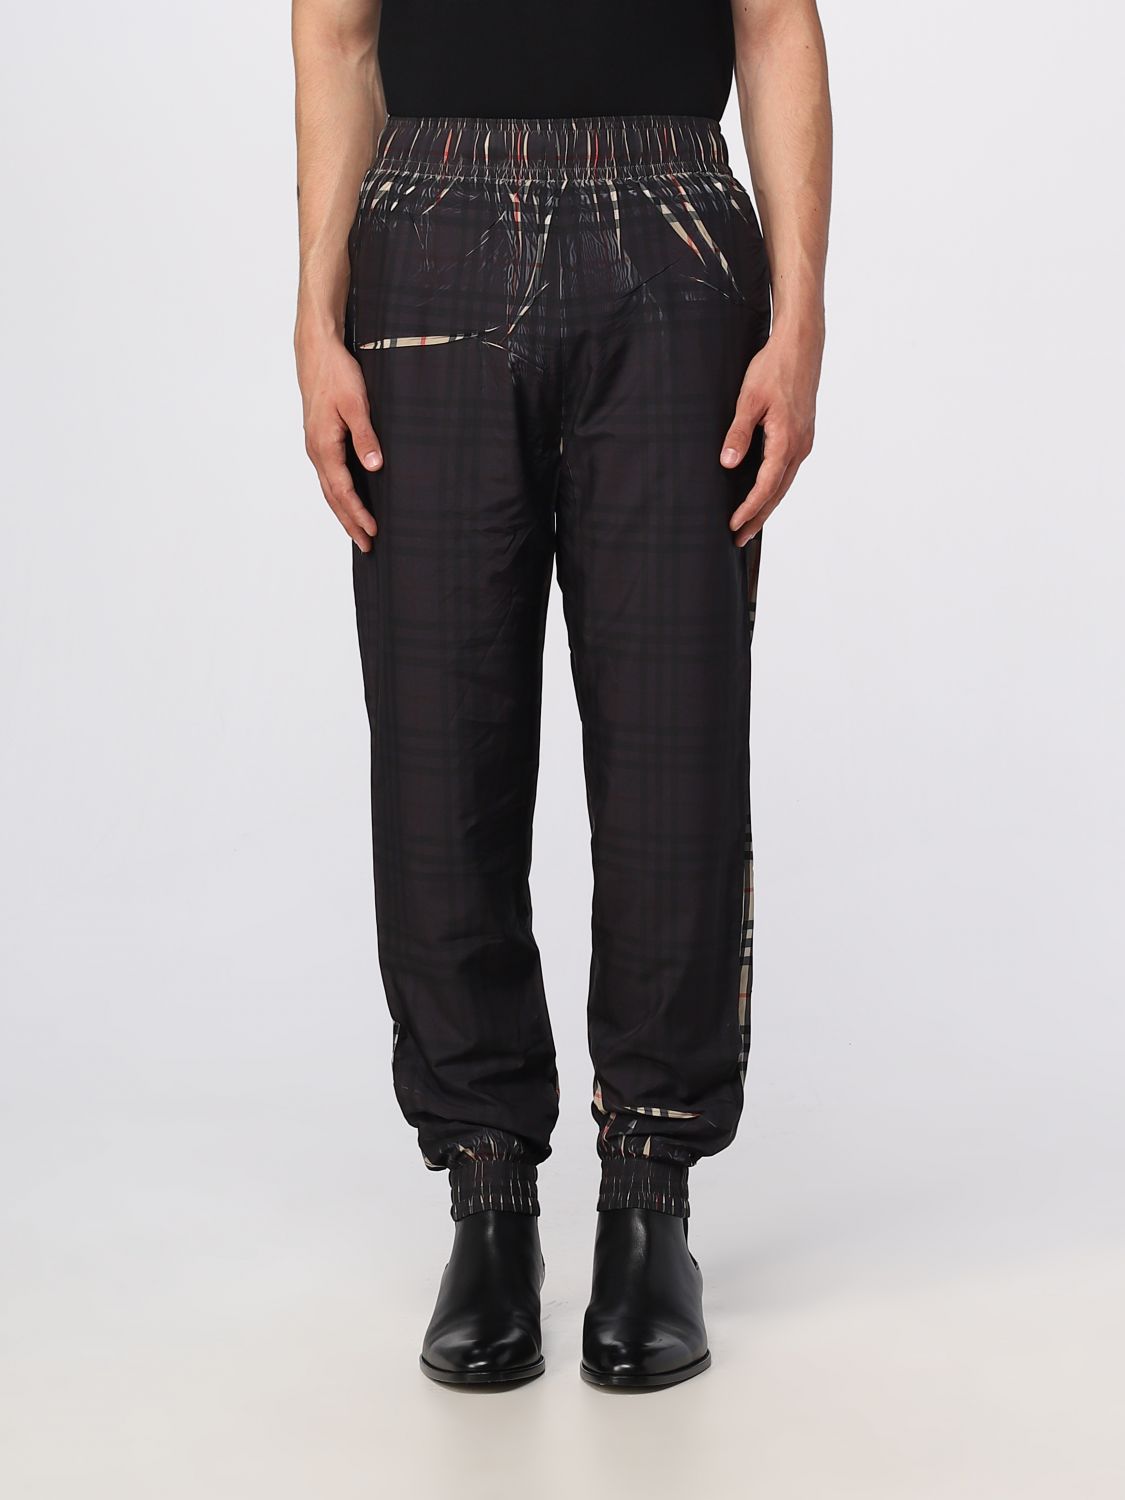 BURBERRY: men's pants - Black | Burberry pants 8070981 online at GIGLIO.COM